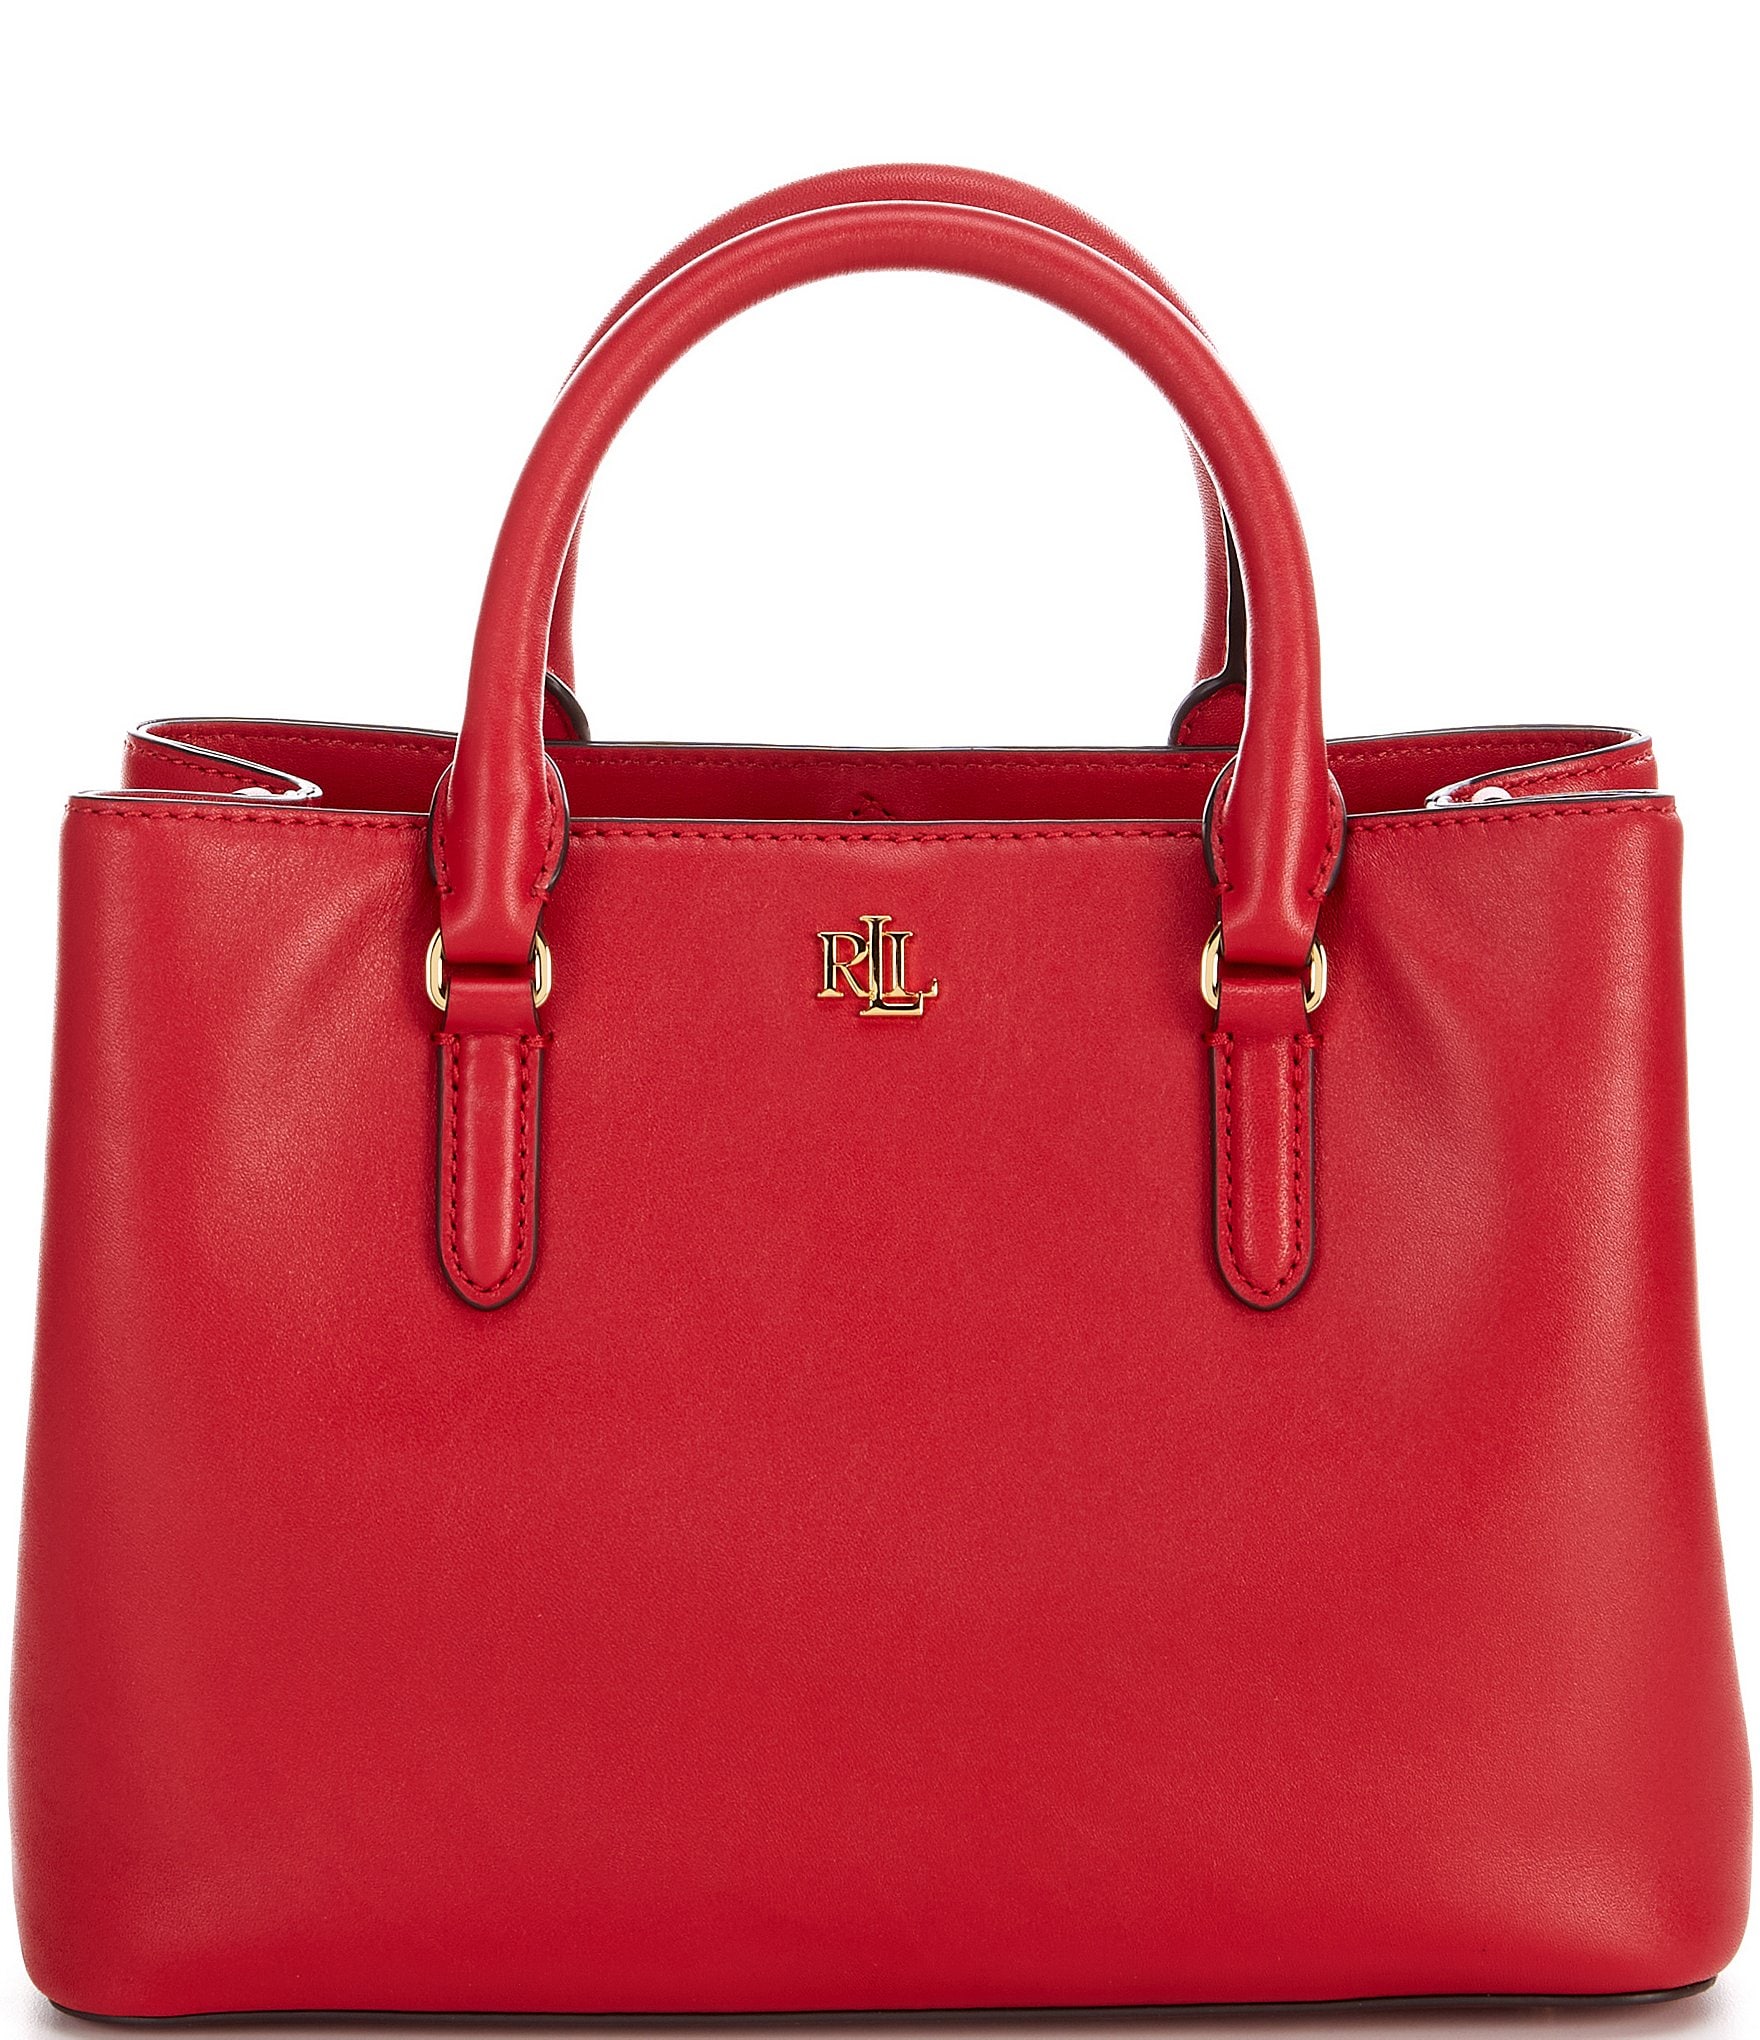 Best Red Ralph Lauren Purse for sale in Tampa, Florida for 2023